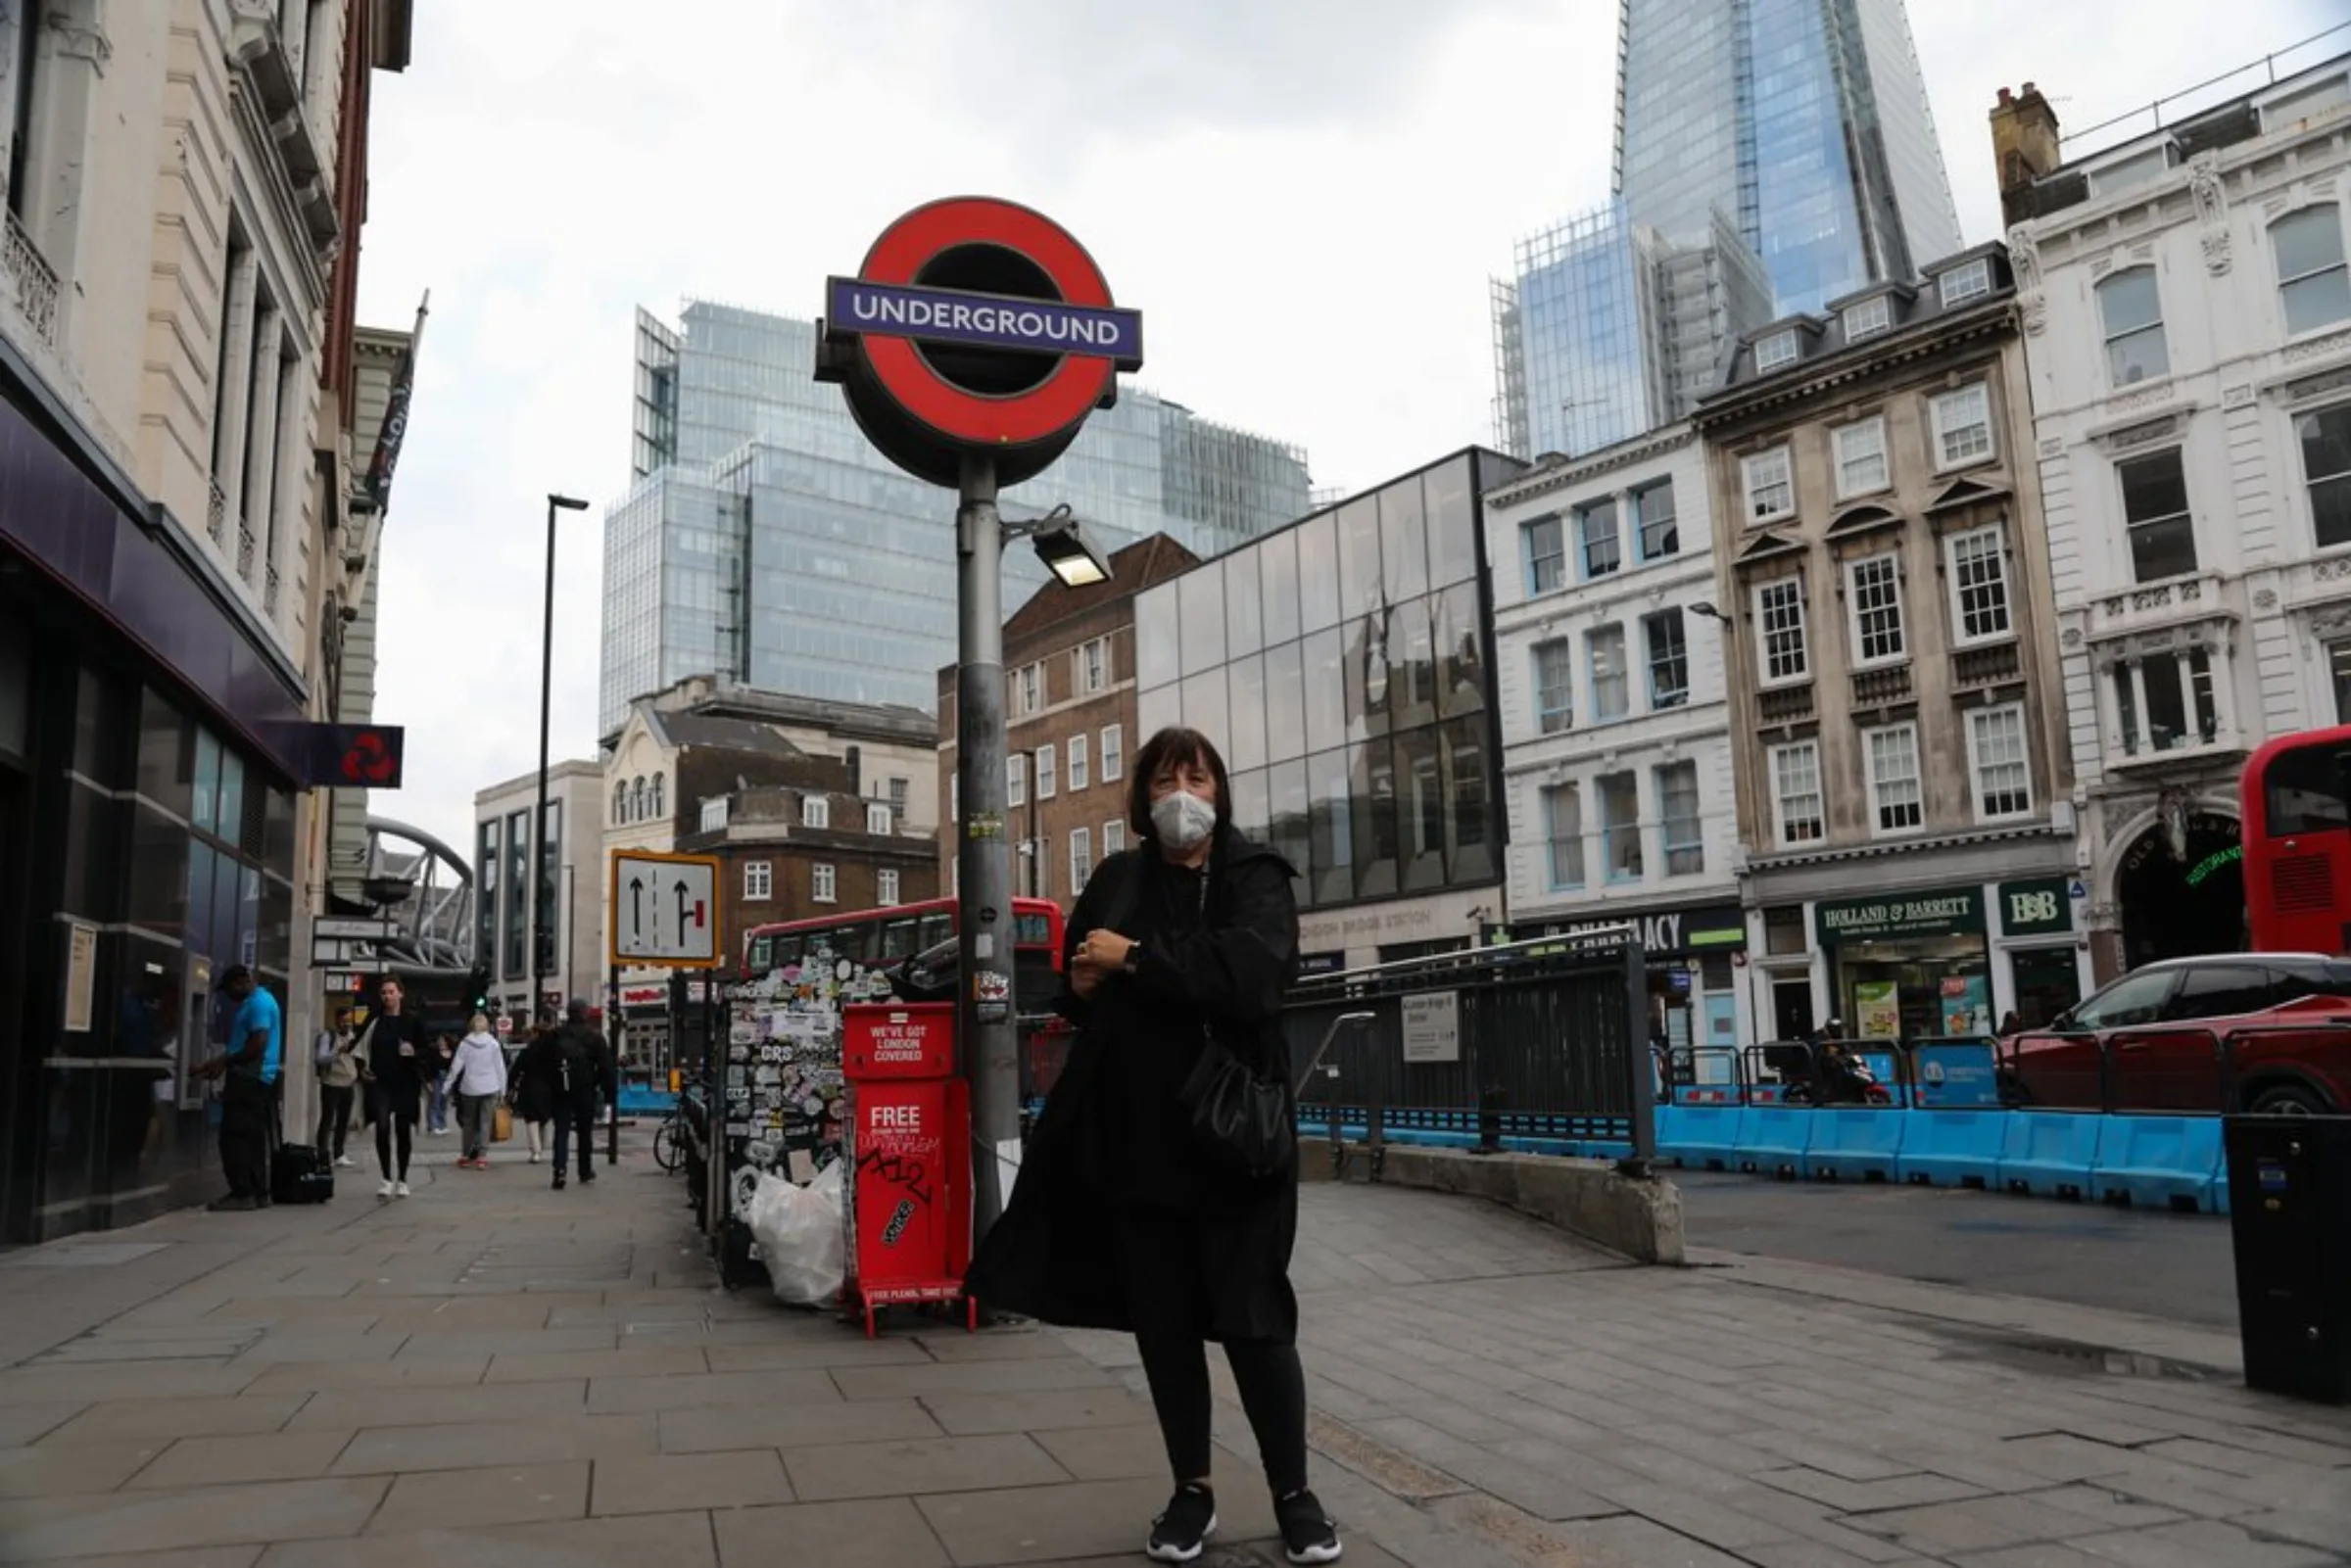 Evelyn Kalmar, 63, pauses outside London Bridge Underground Station on her way to her nearby gym in London, England, on October 19, 2021. If the line floods more frequently, “it would make London very difficult to move around and cause a lot of unrest if people are fighting to get on transport,” she said